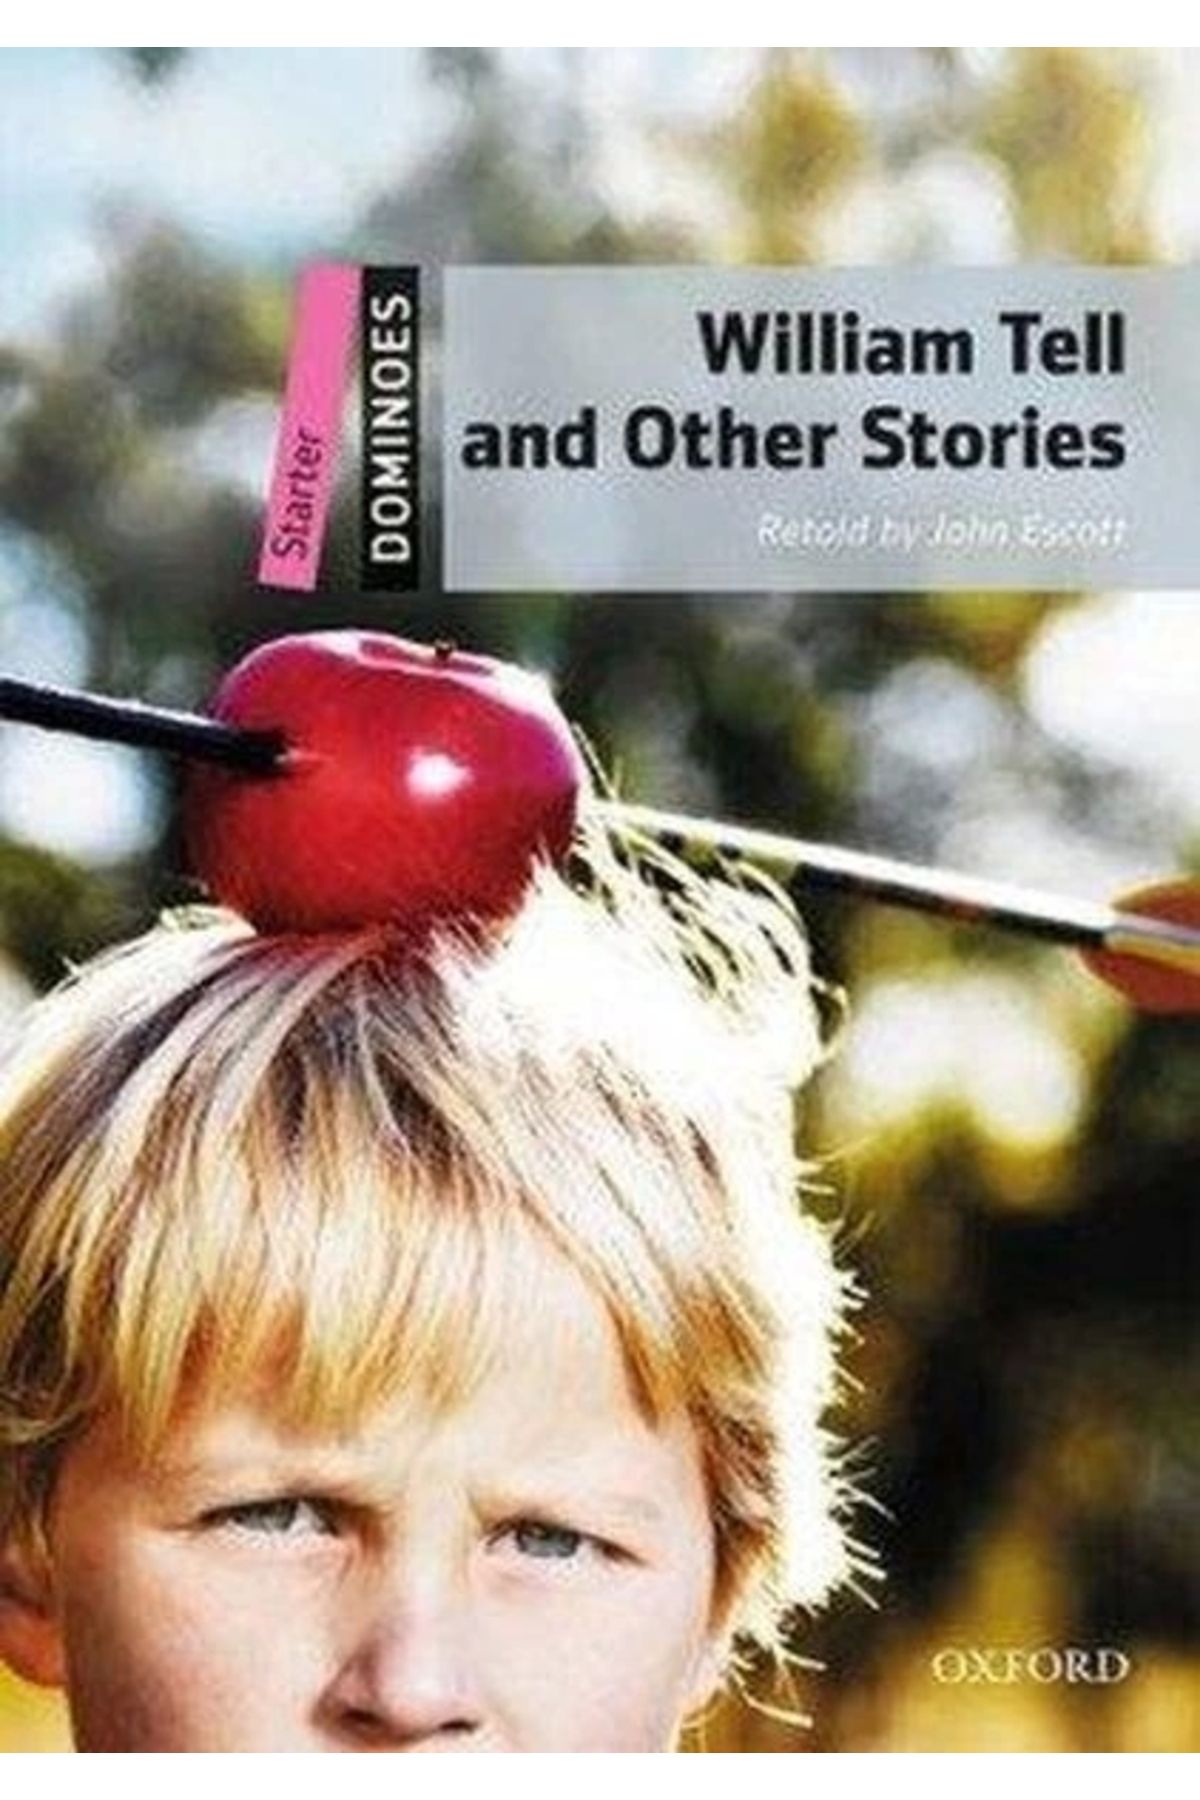 OXFORD UNIVERSITY PRESS William Tell and Other Stories